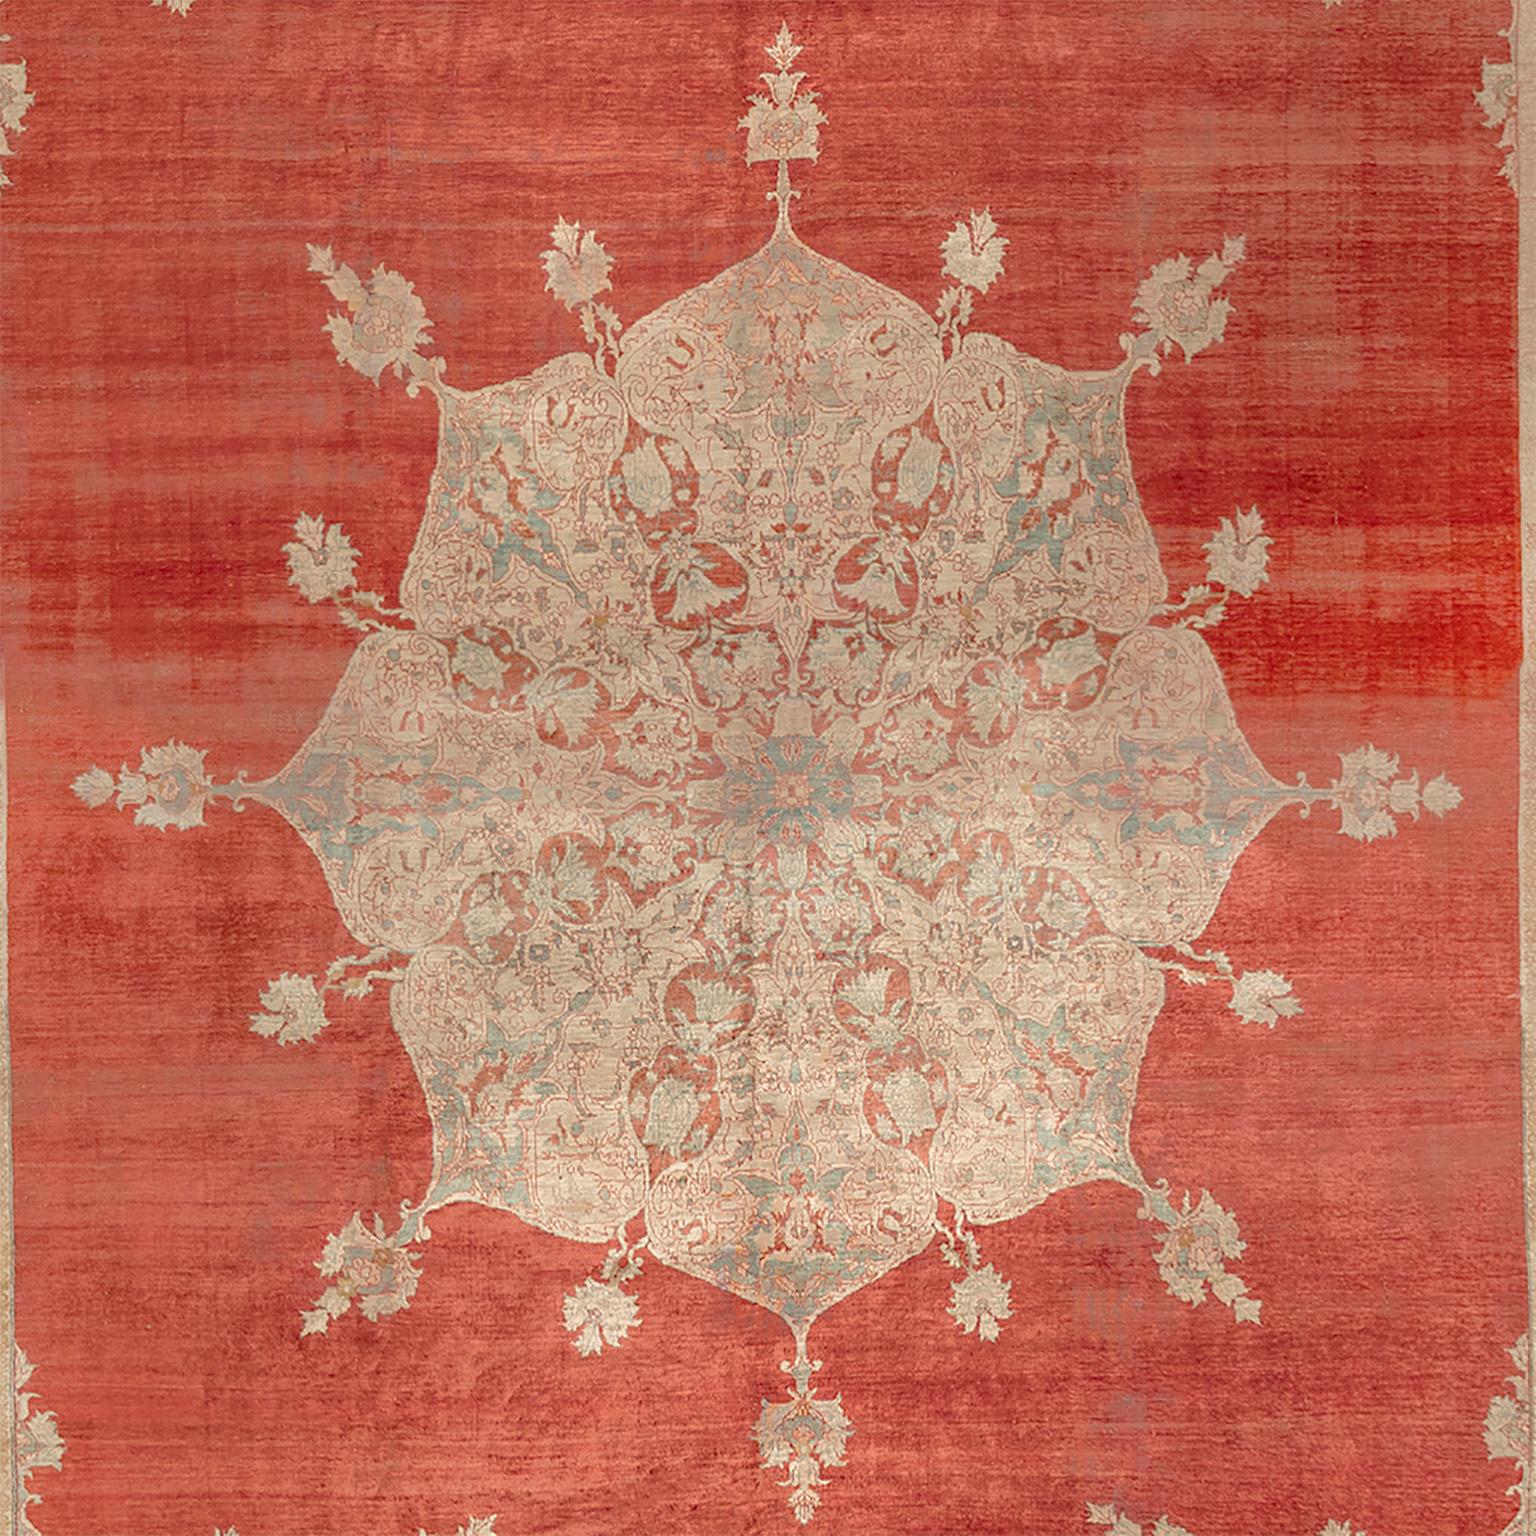 Floral, open field with medallion.

Iran ca. 1880
Measures: 12'8